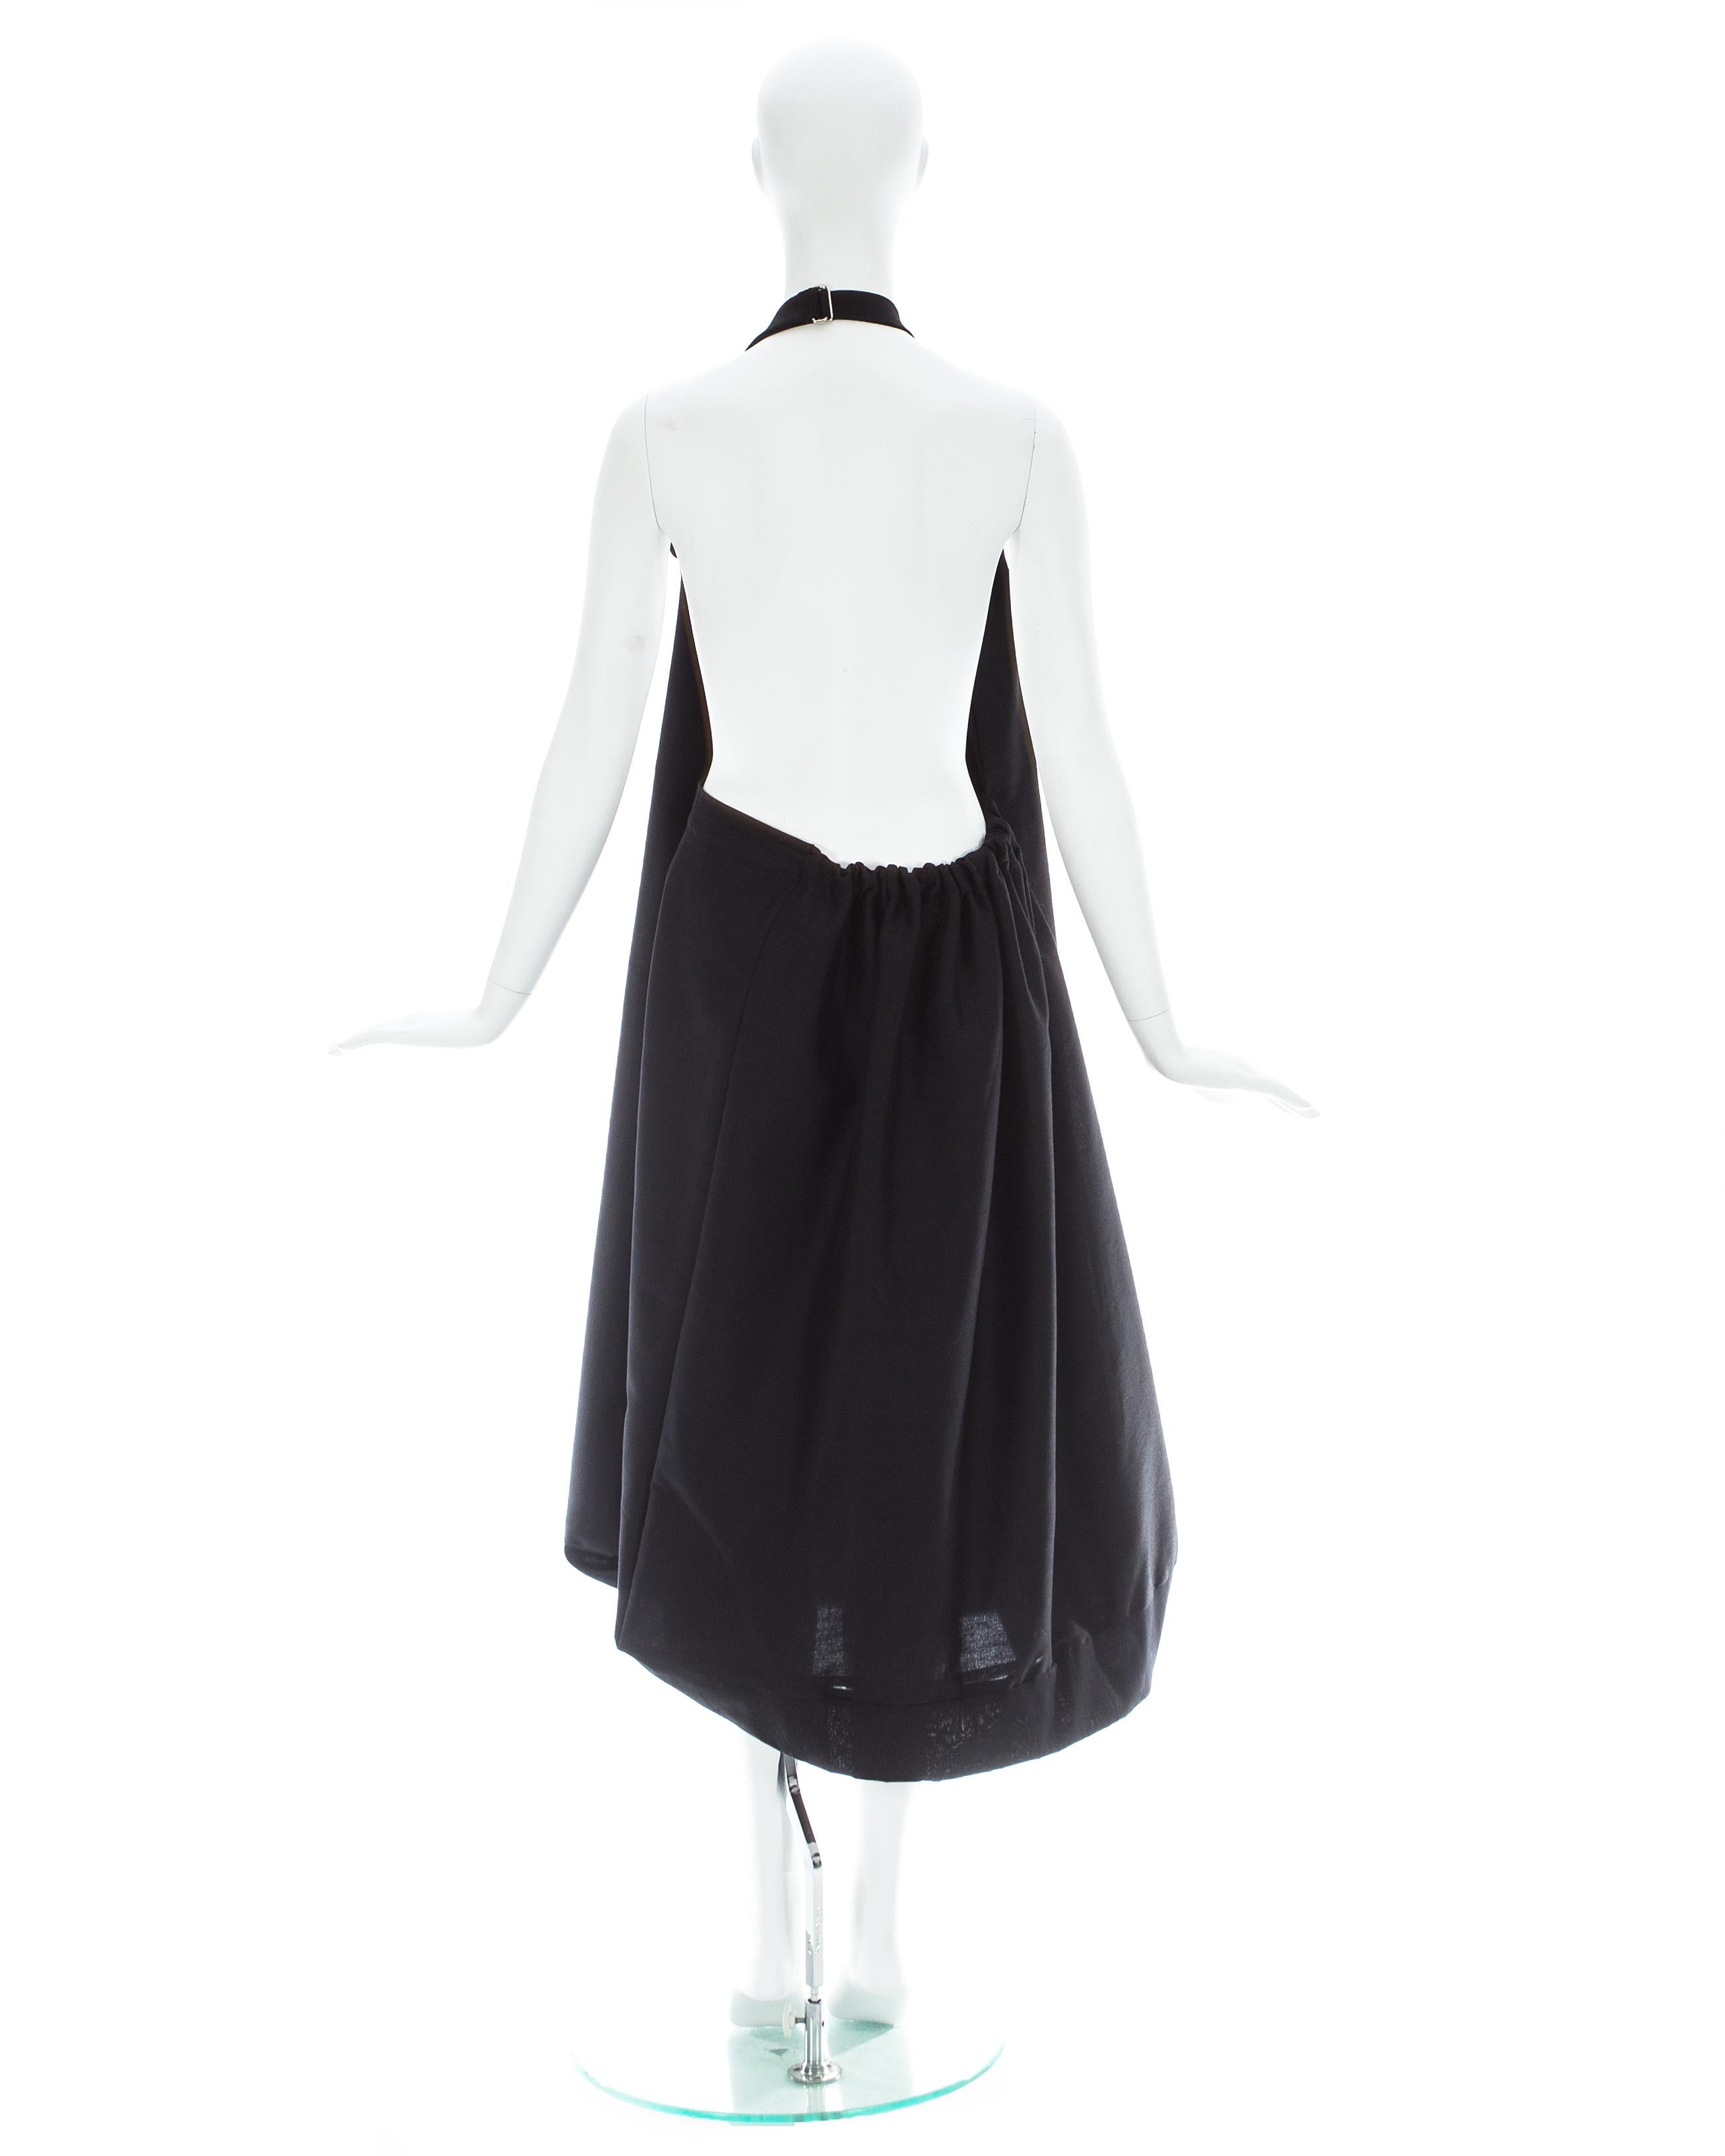 Yohji Yamamoto black wool dress with built-in bag, ss 2001 In Excellent Condition For Sale In London, London